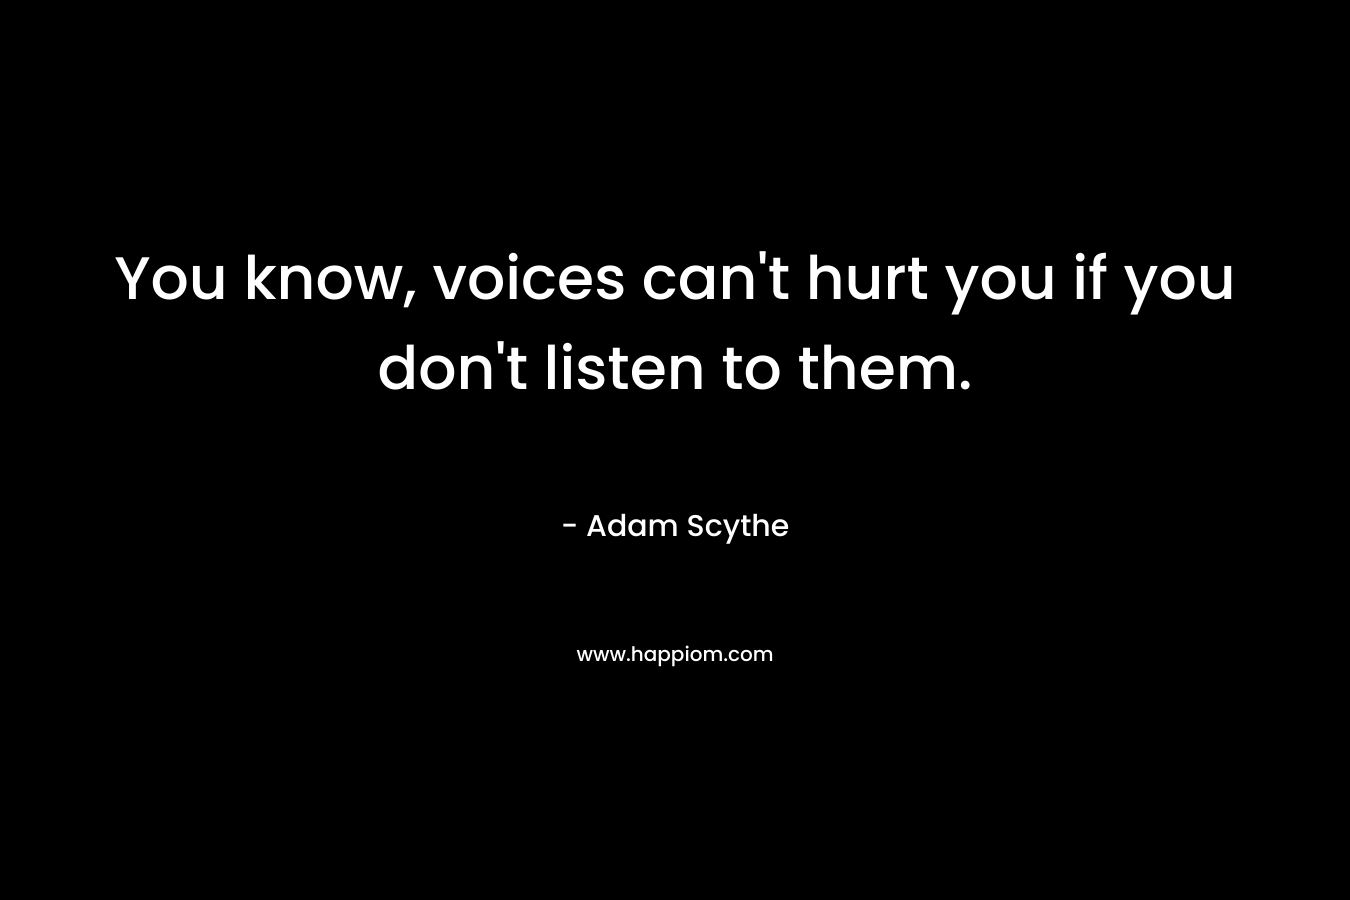 You know, voices can’t hurt you if you don’t listen to them. – Adam Scythe